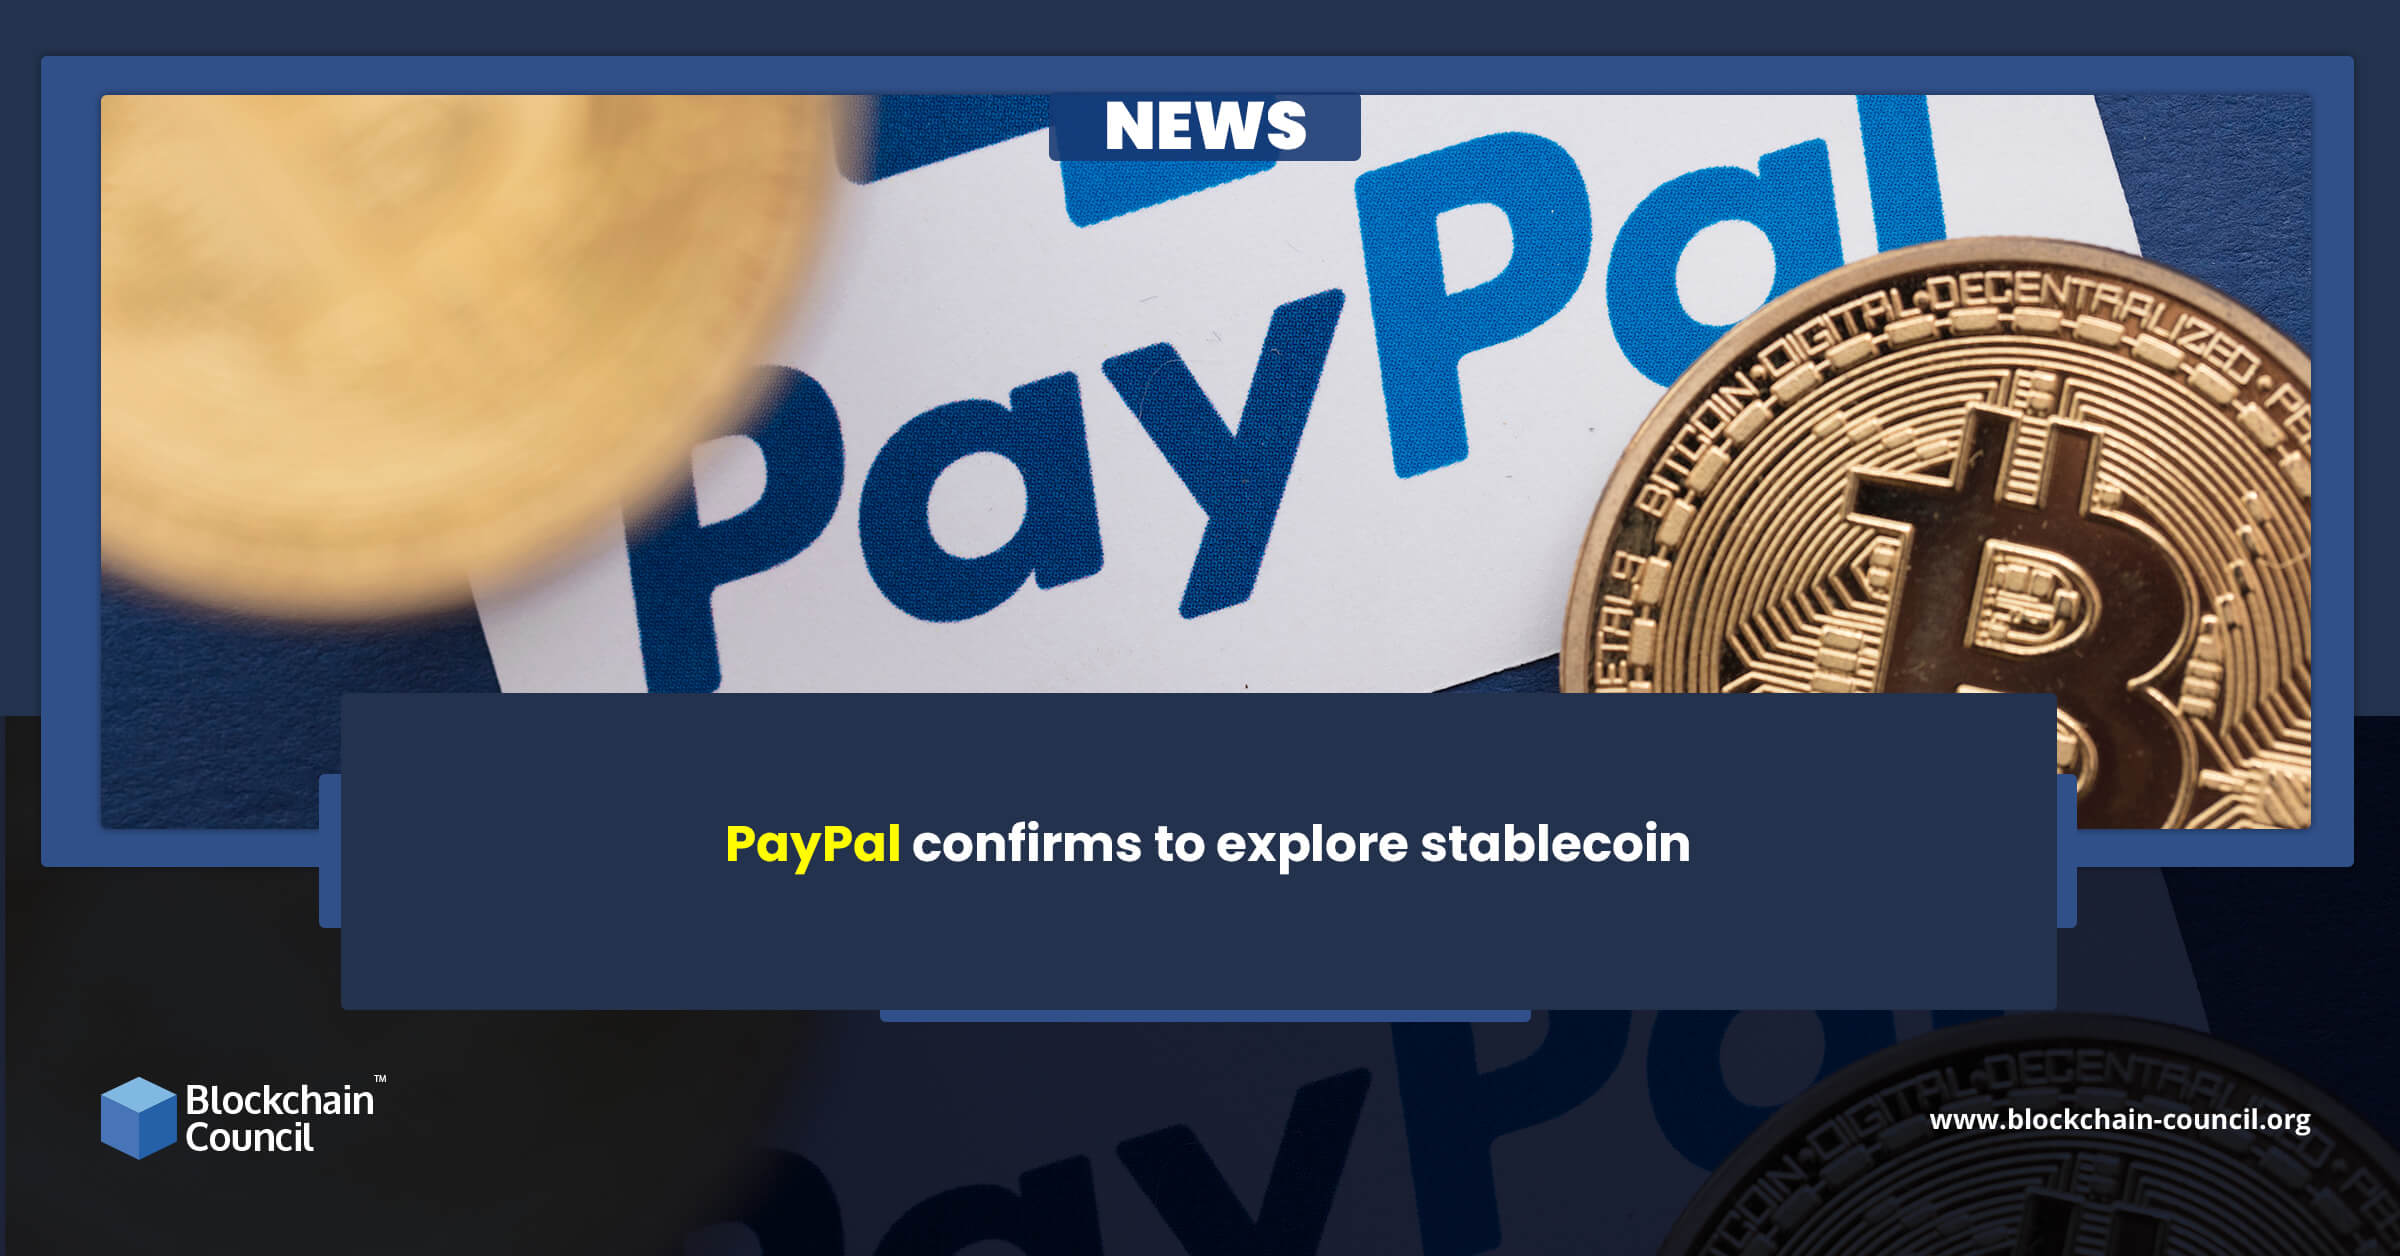 PayPal confirms to explore stablecoin